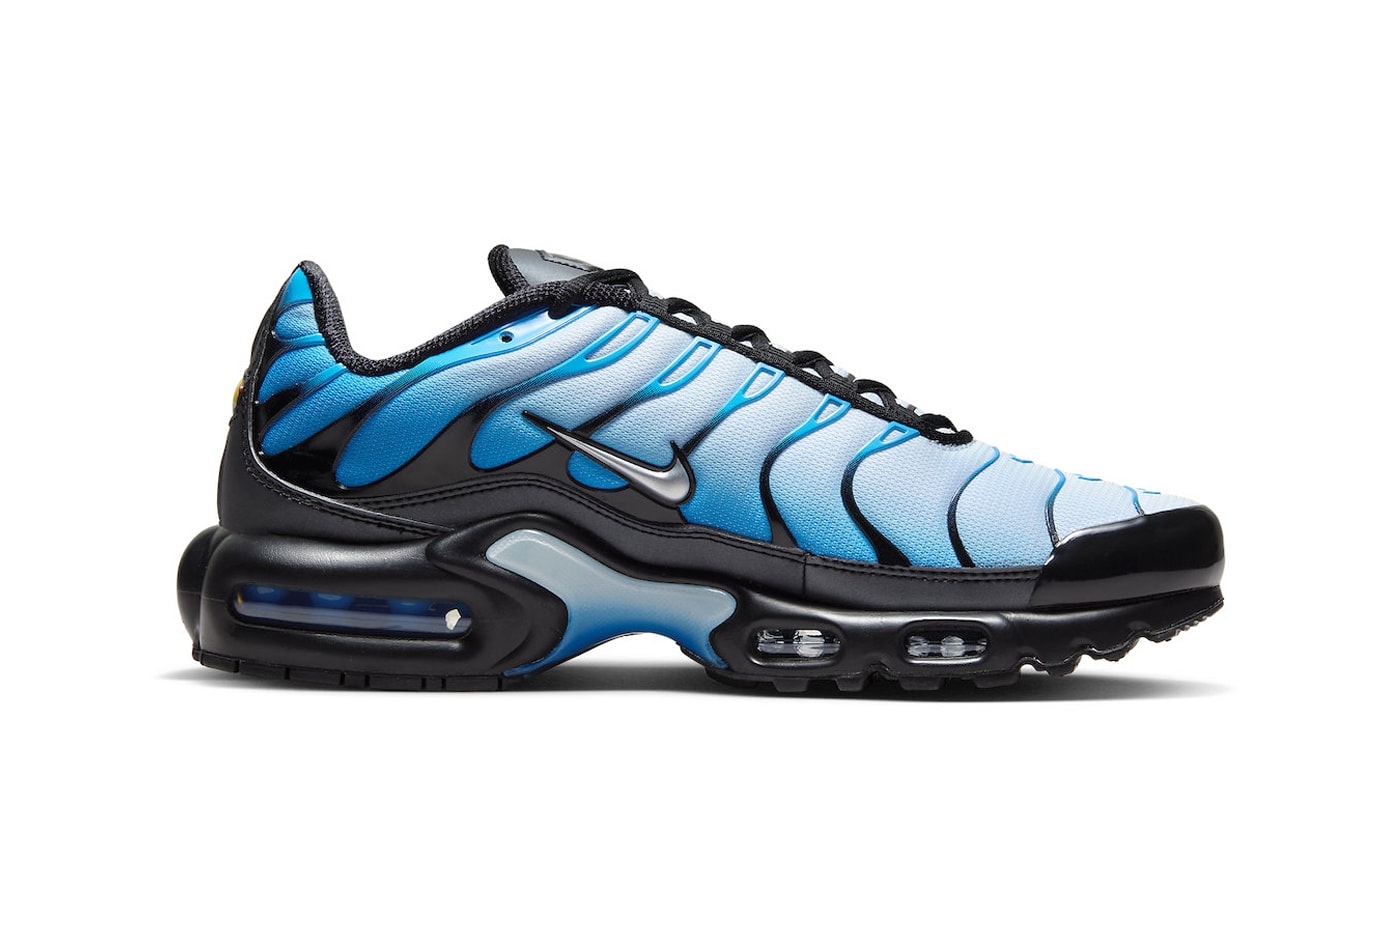 Swoosh Fans Are Going To Love This Nike Air Max Plus 3 - Sneaker News